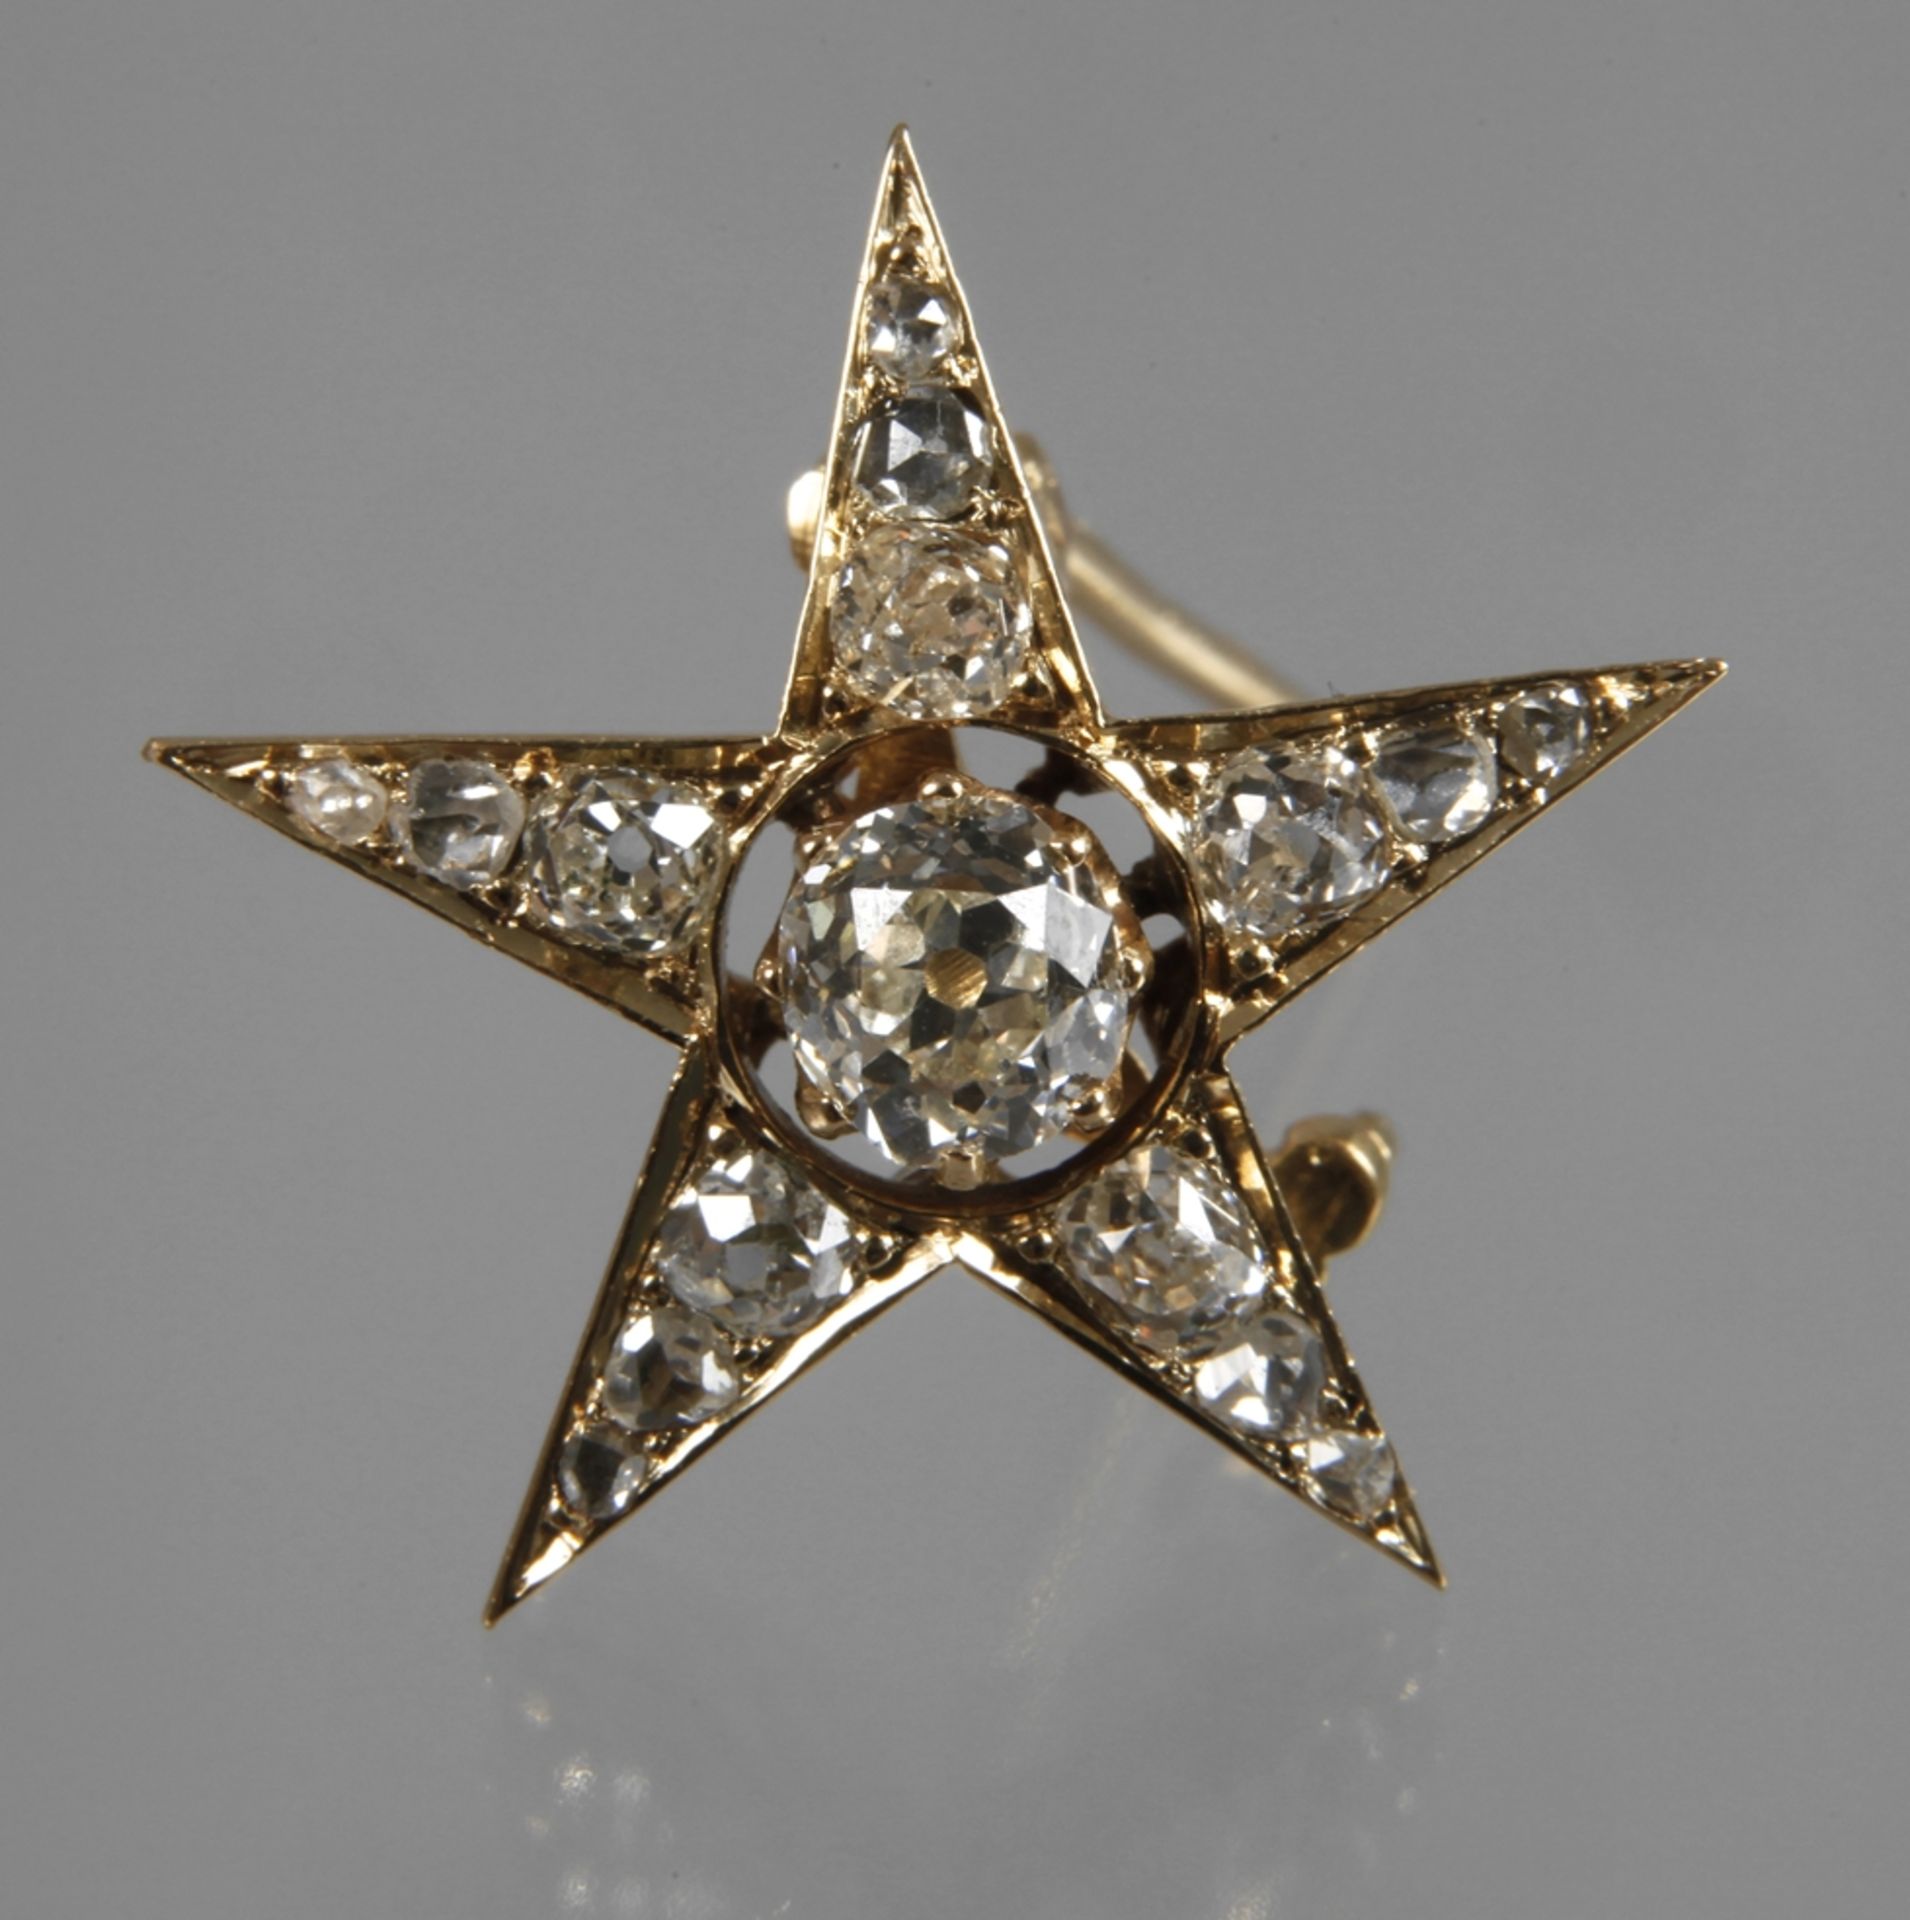 Star brooch with old-cut diamonds